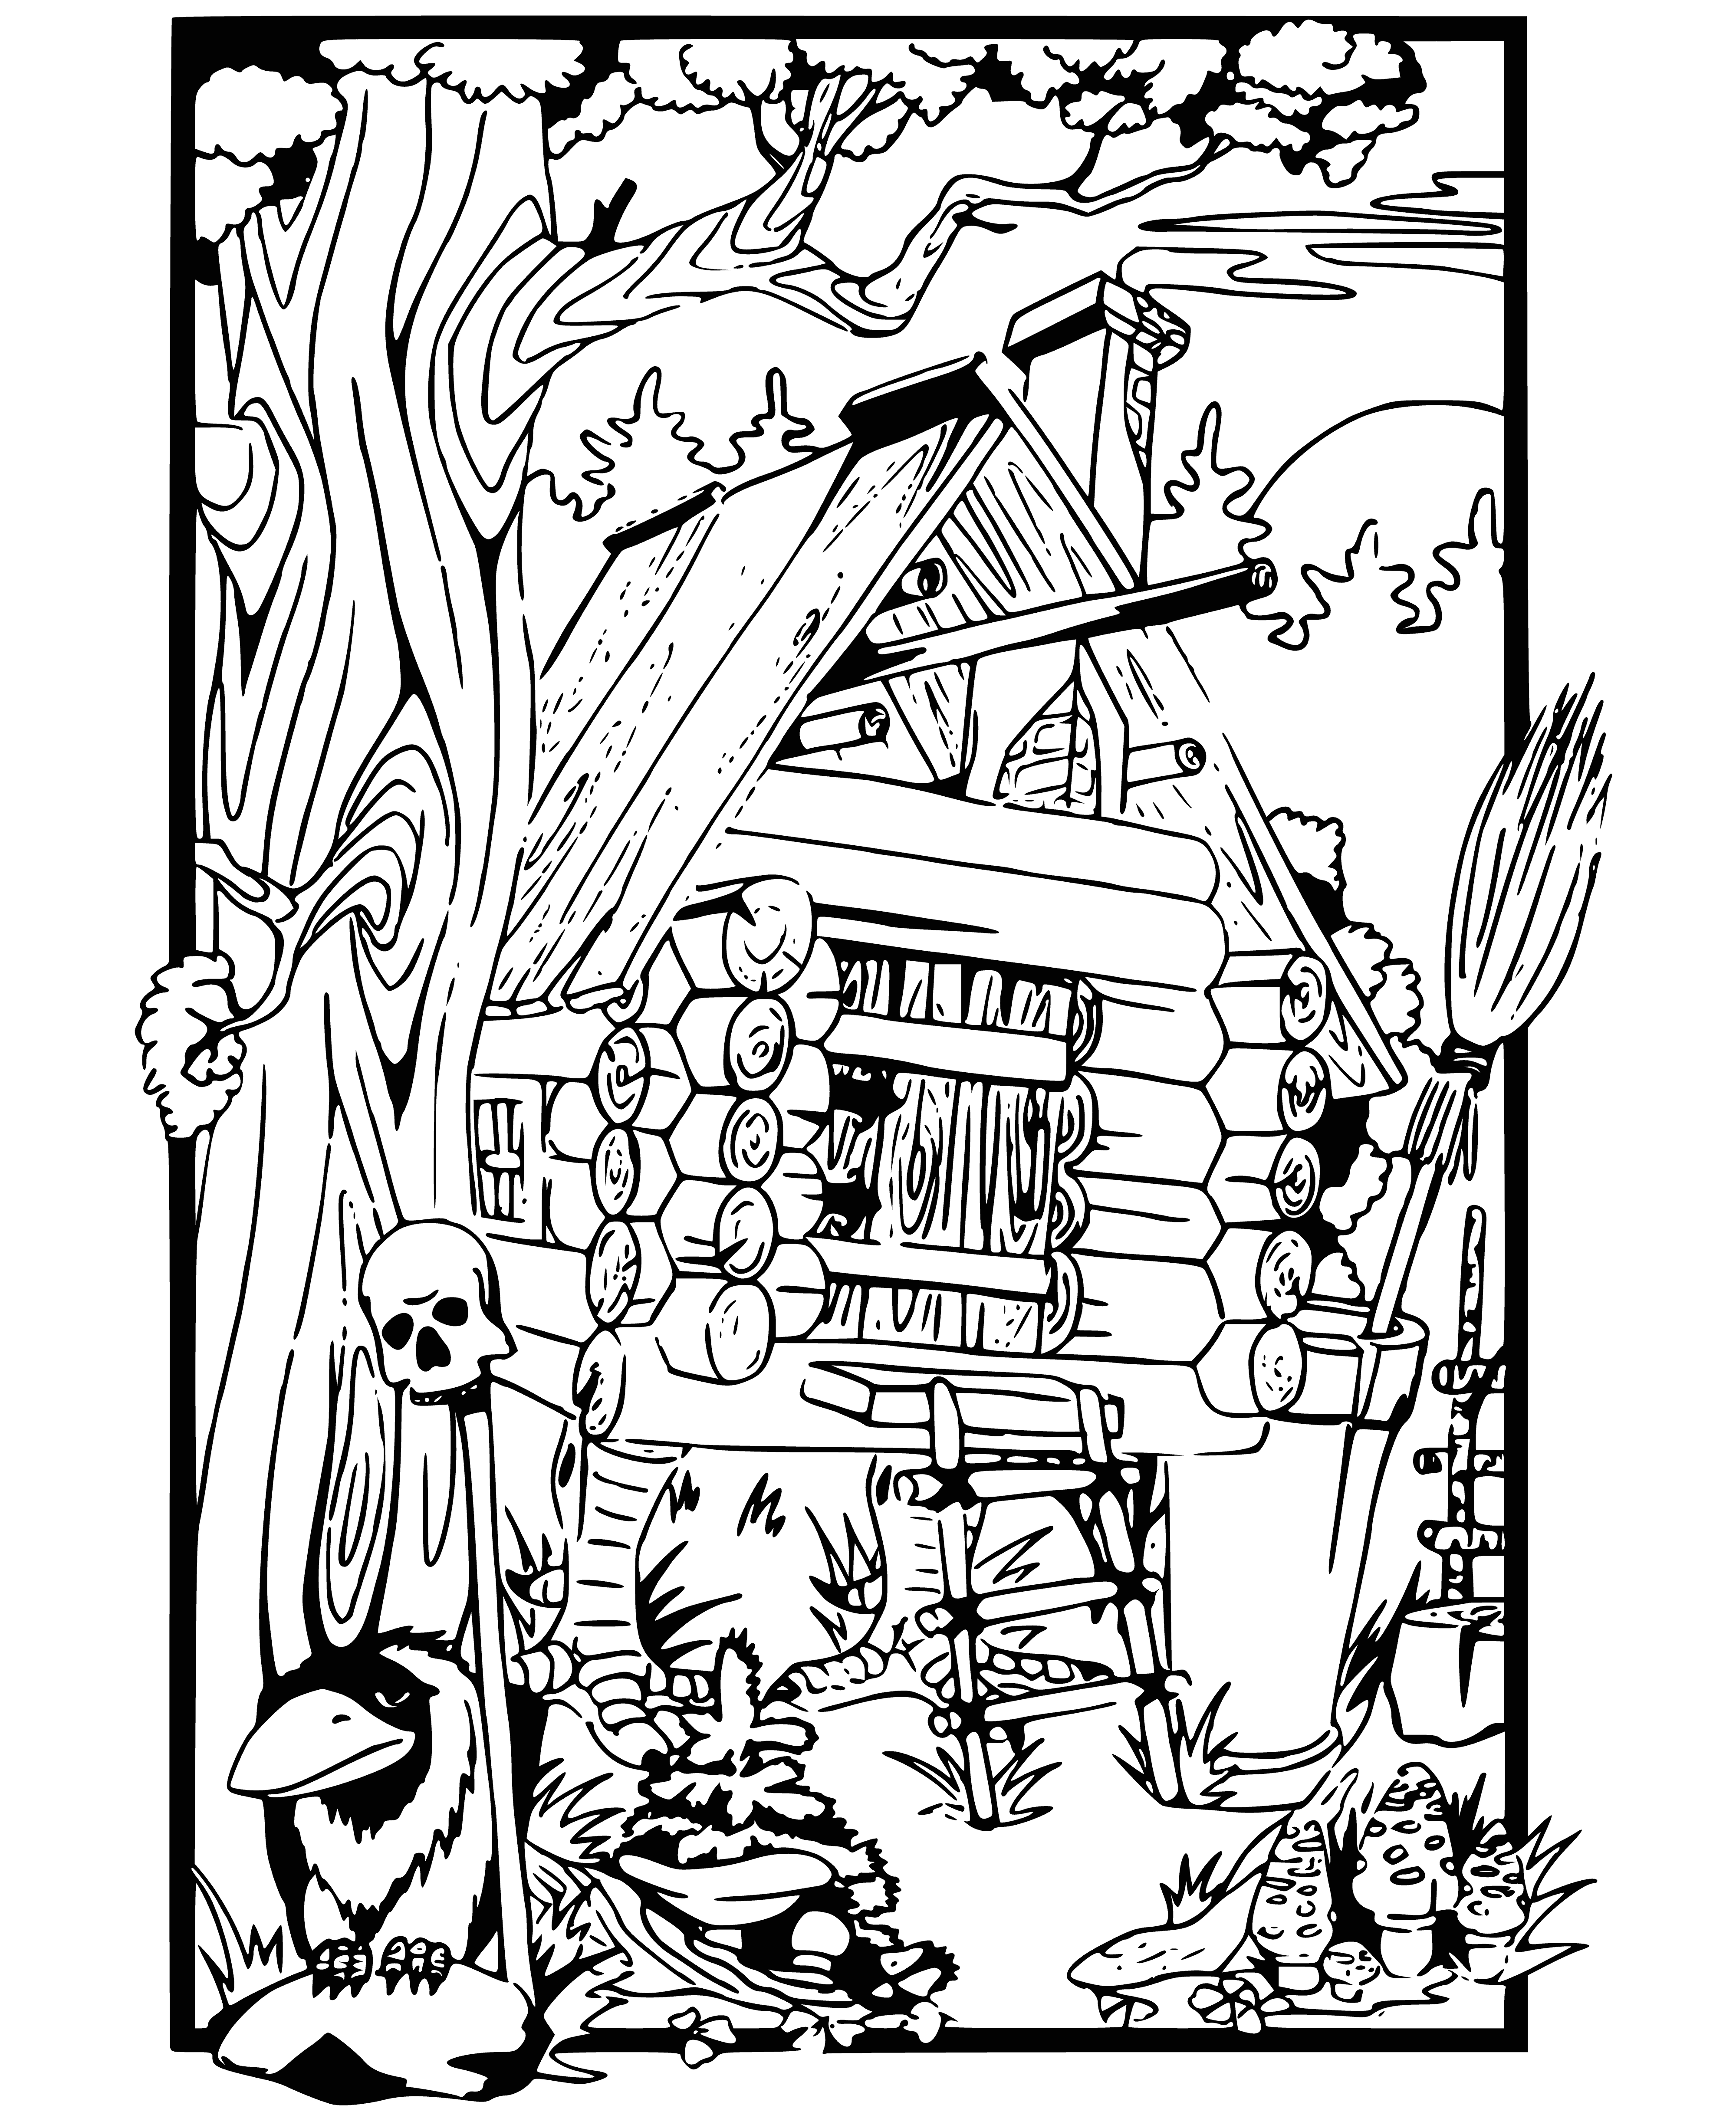 A hut on chicken legs coloring page